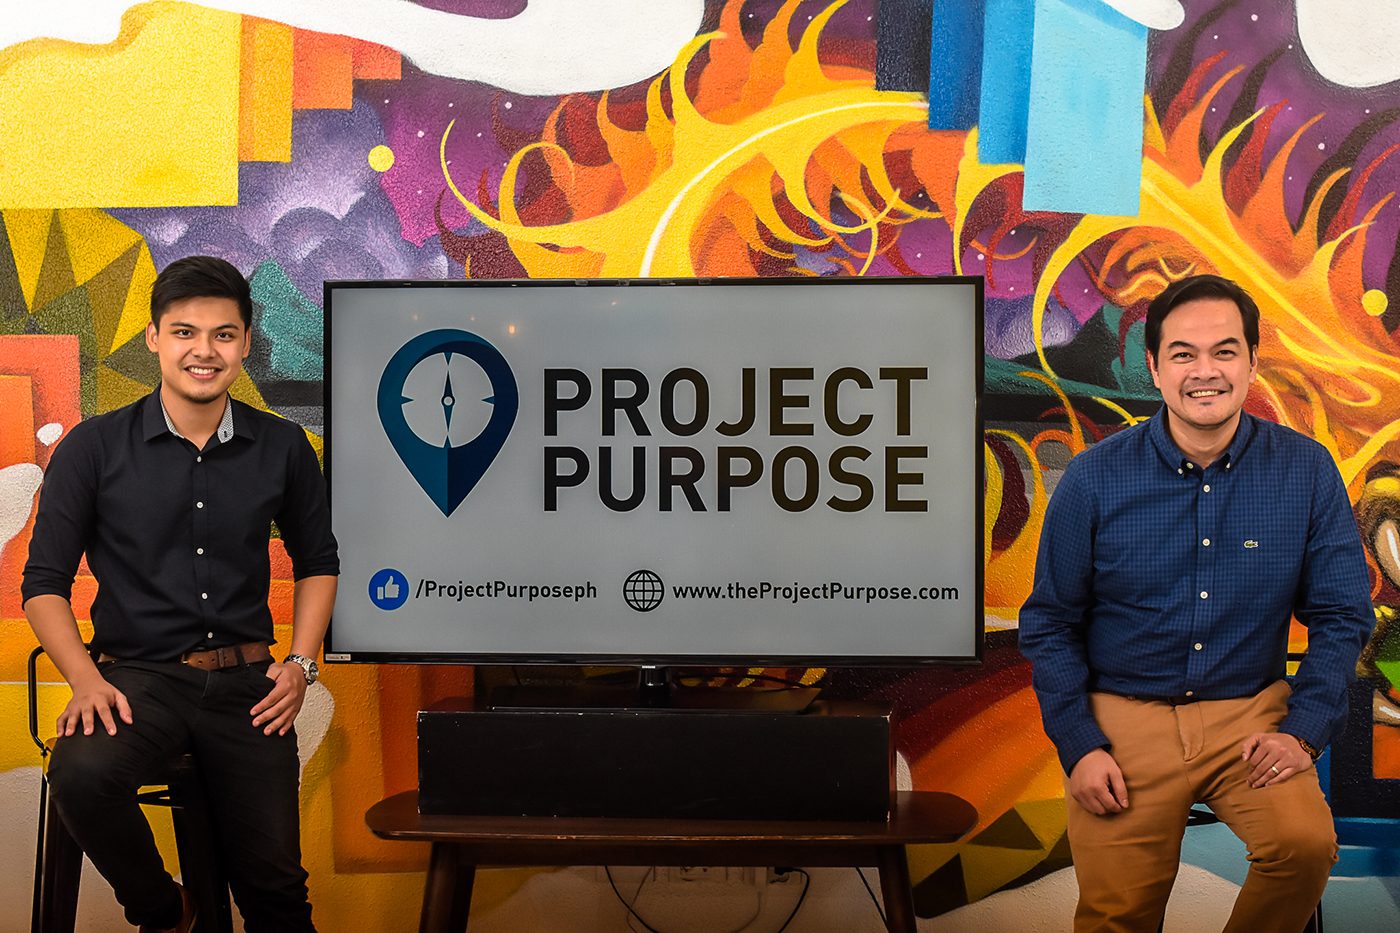 Finding your calling through ‘Project Purpose’